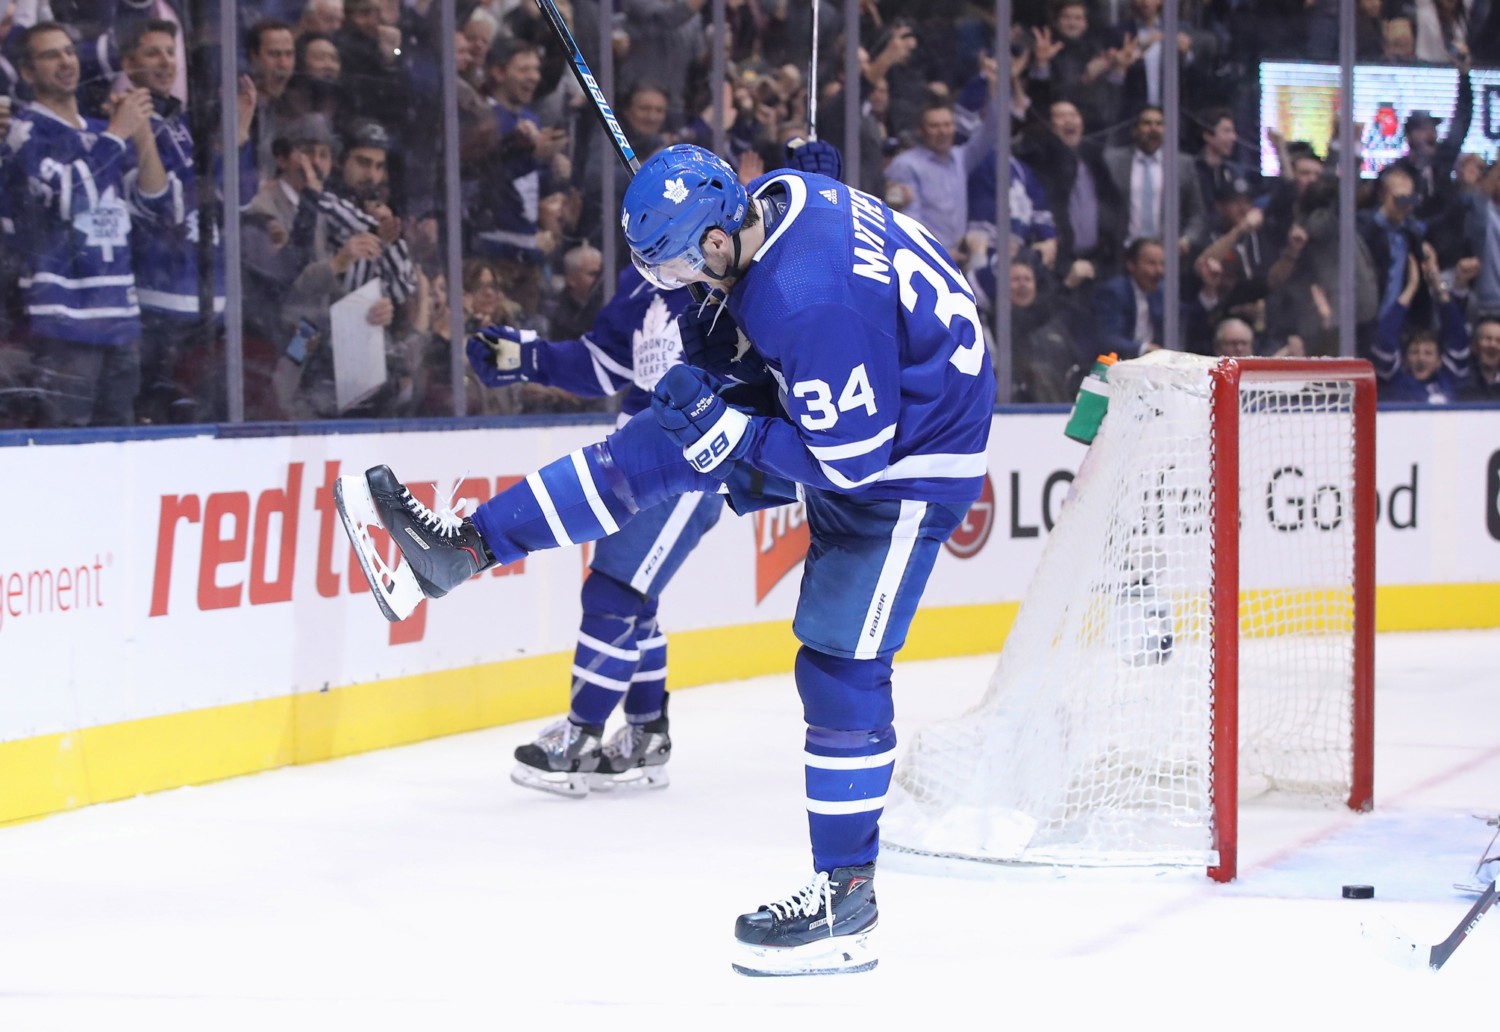 A Toronto Maple Leafs and Auston Matthews extension in the next month shouldn't be a shock.